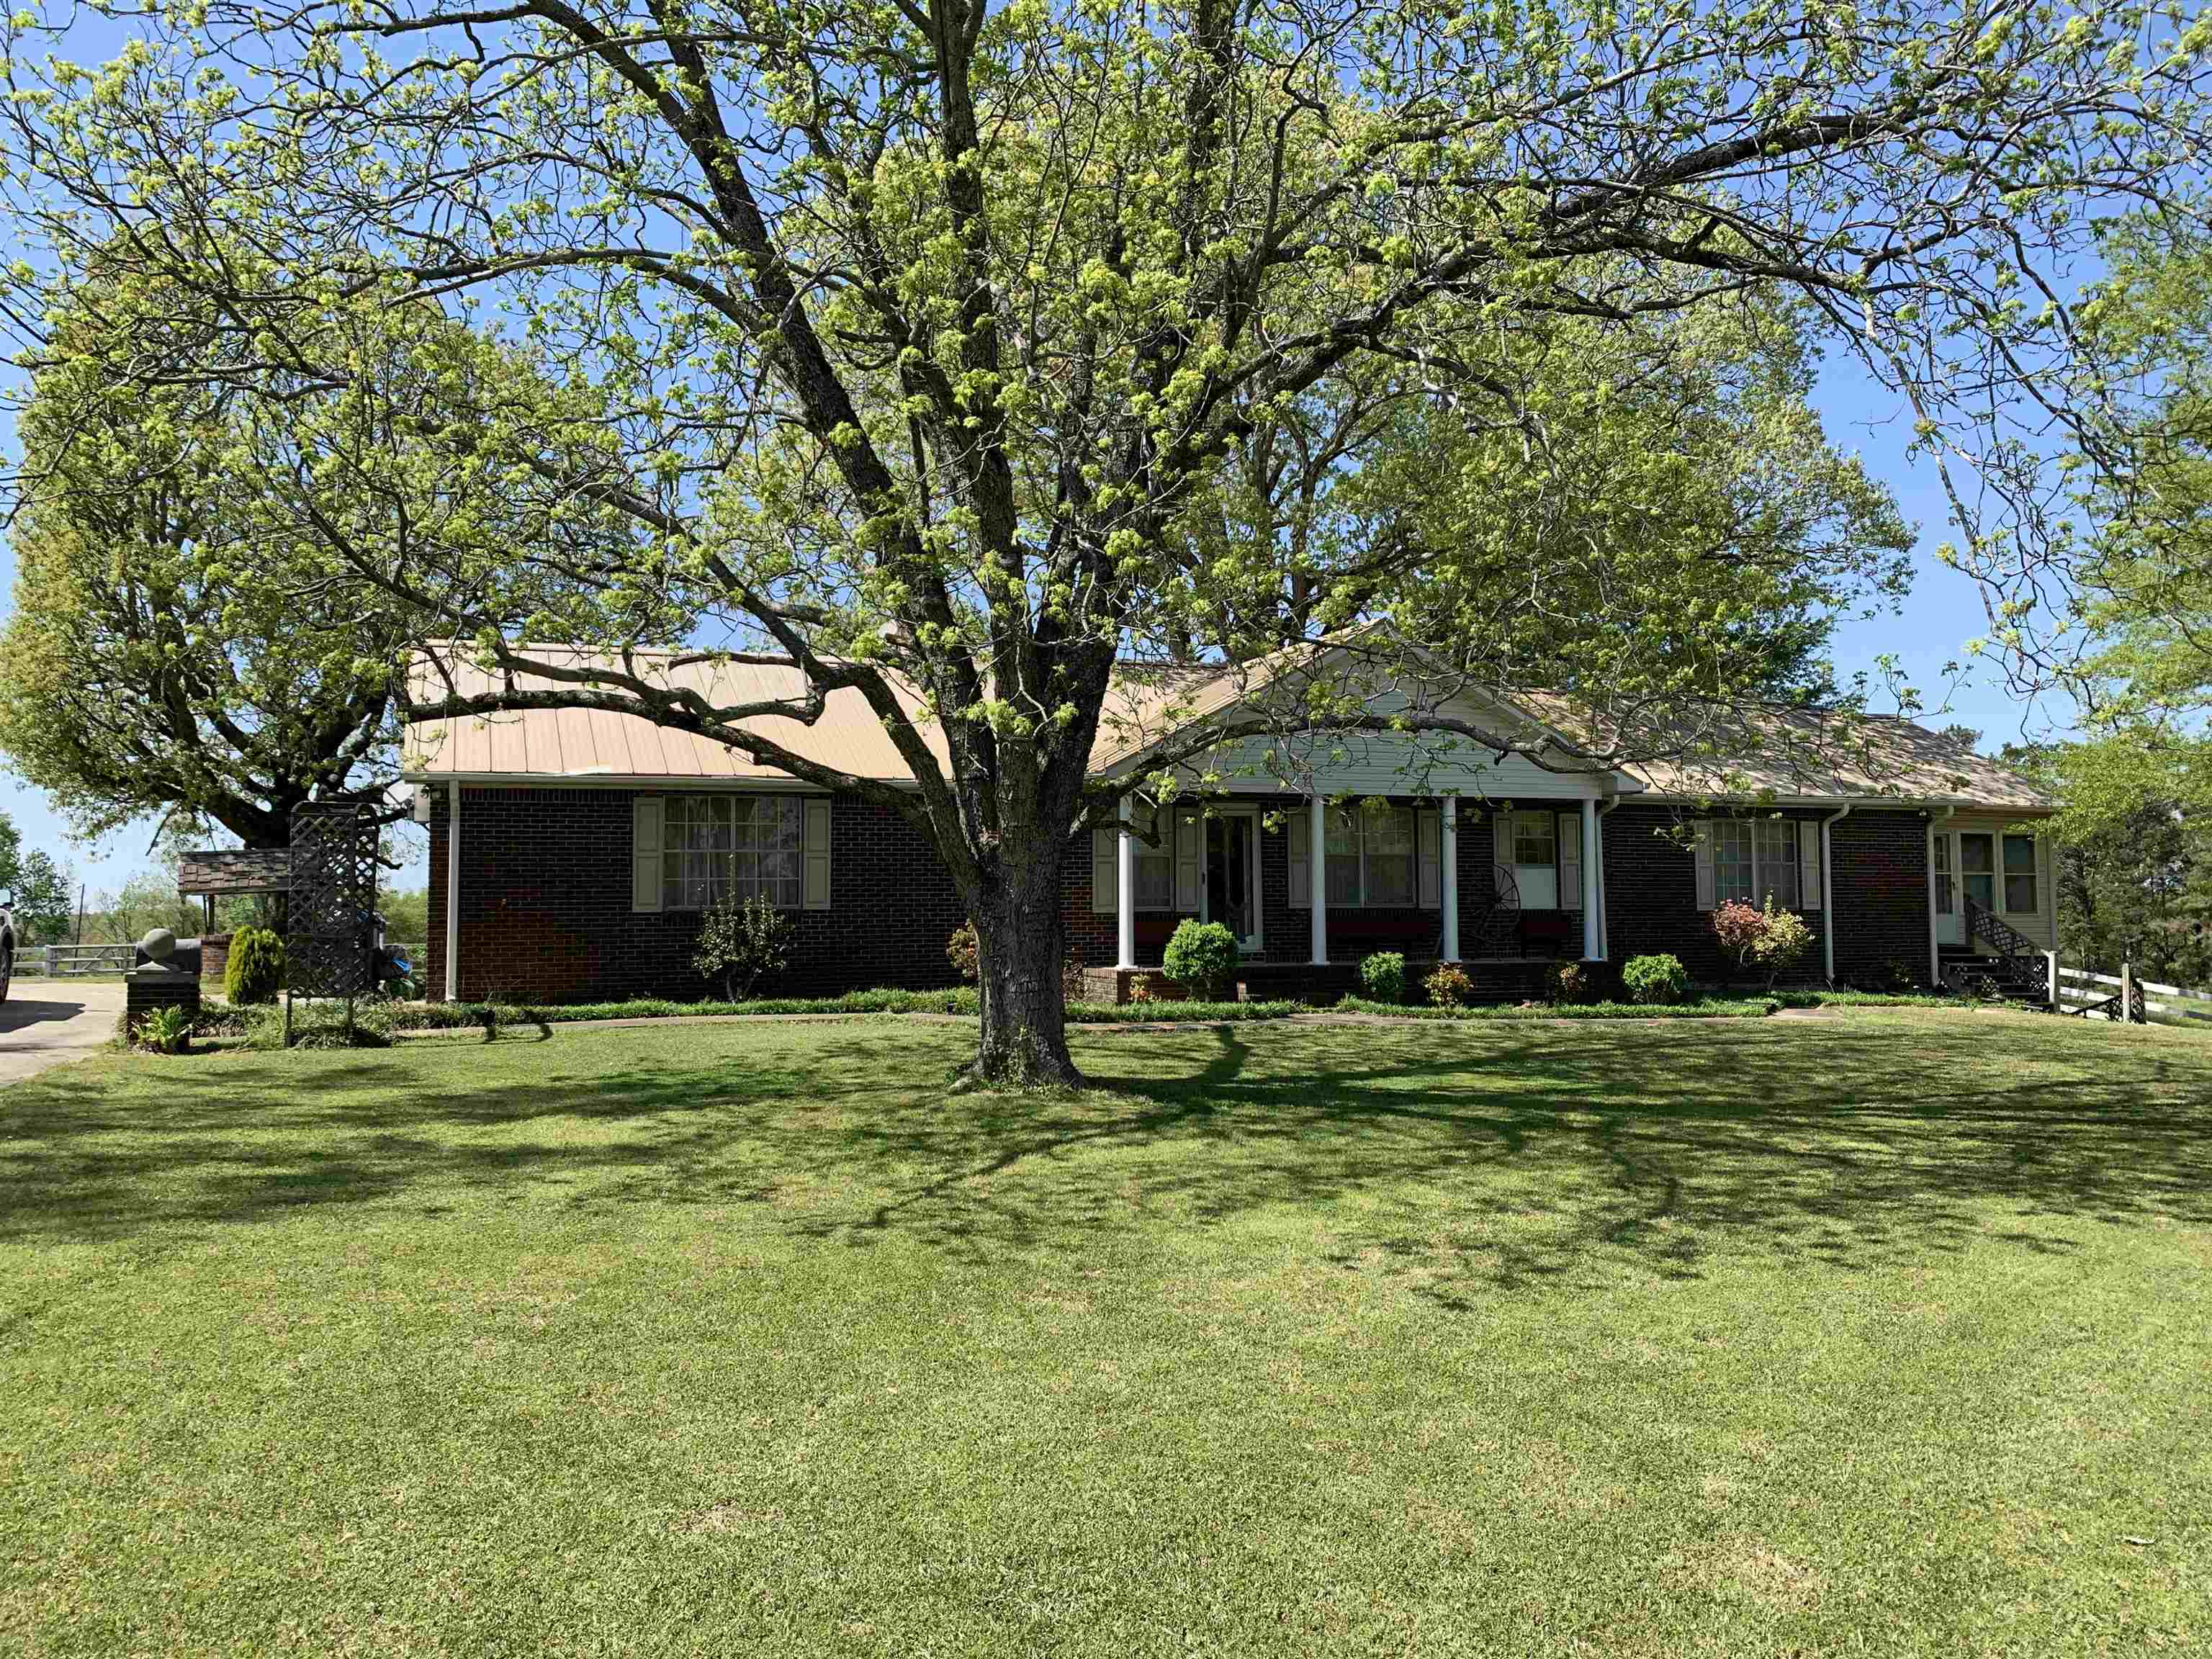 Charming farmhouse with income already in place.  This property has 2 houses & 40 acres on a county road dead end. The 40 acres has approximately 70% pasture and 30% mature hardwoods.  This is a must see.